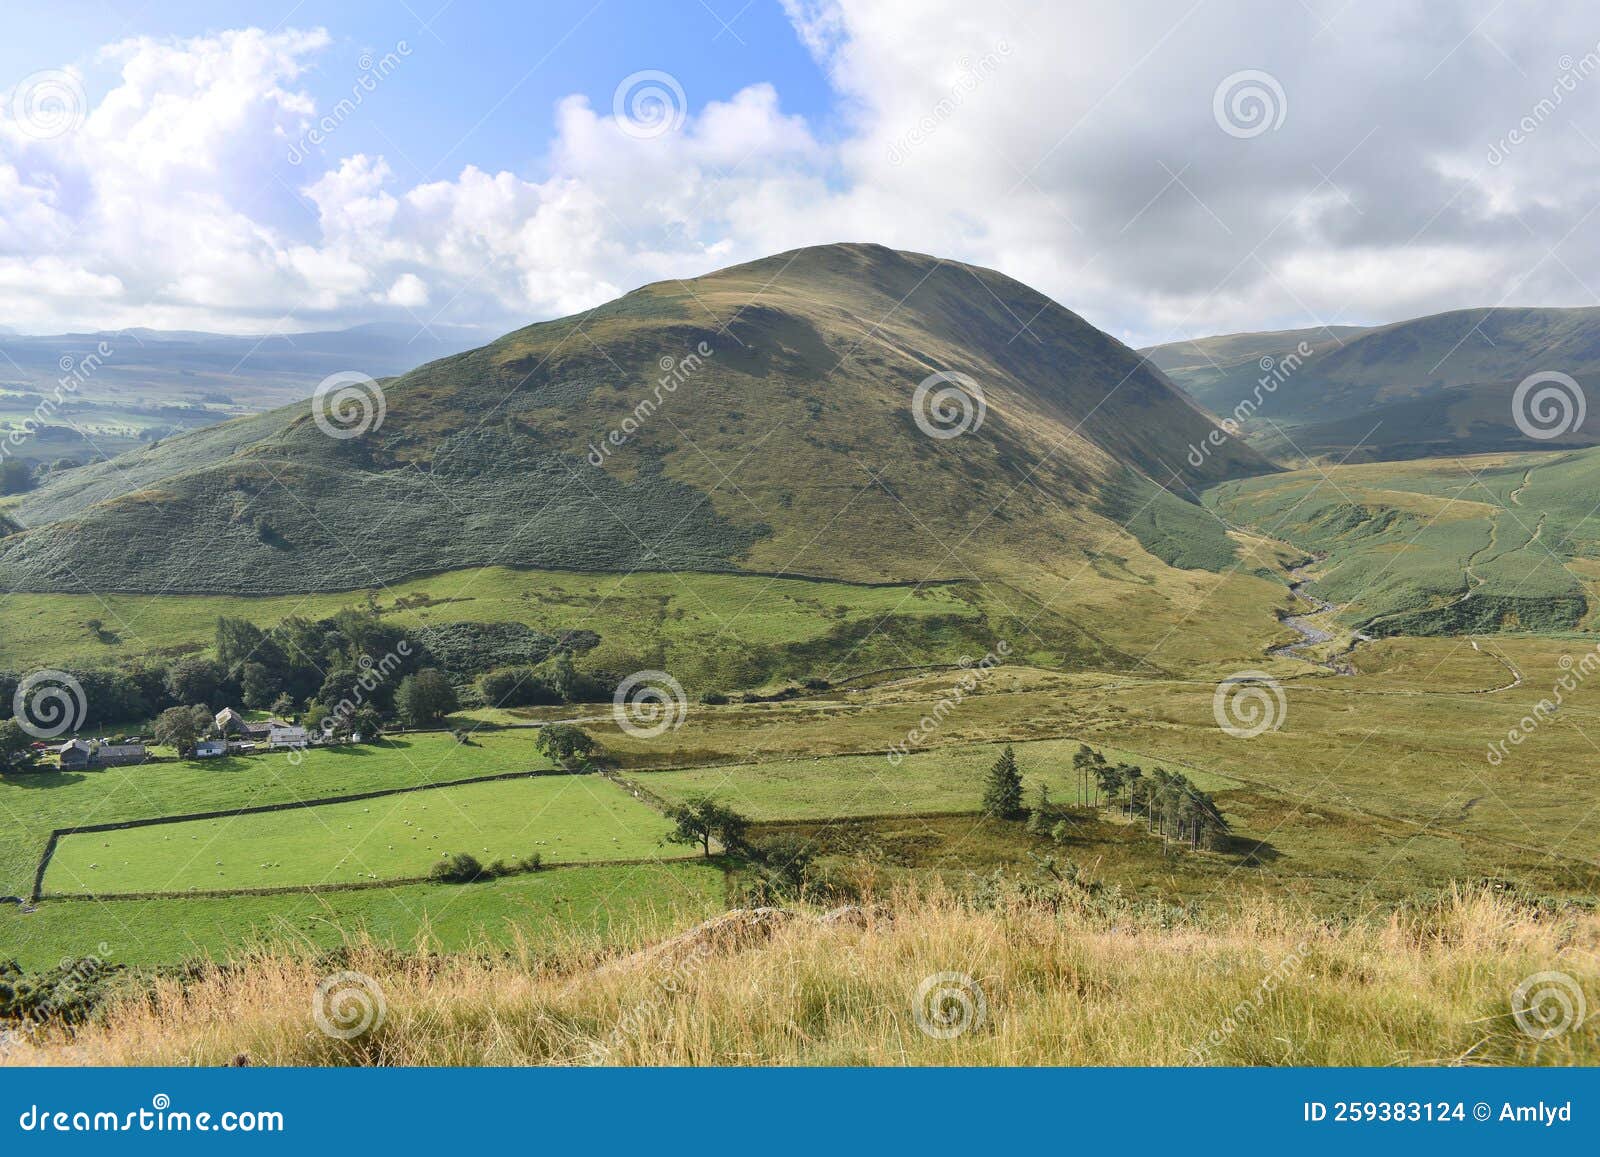 souther fell, lake district